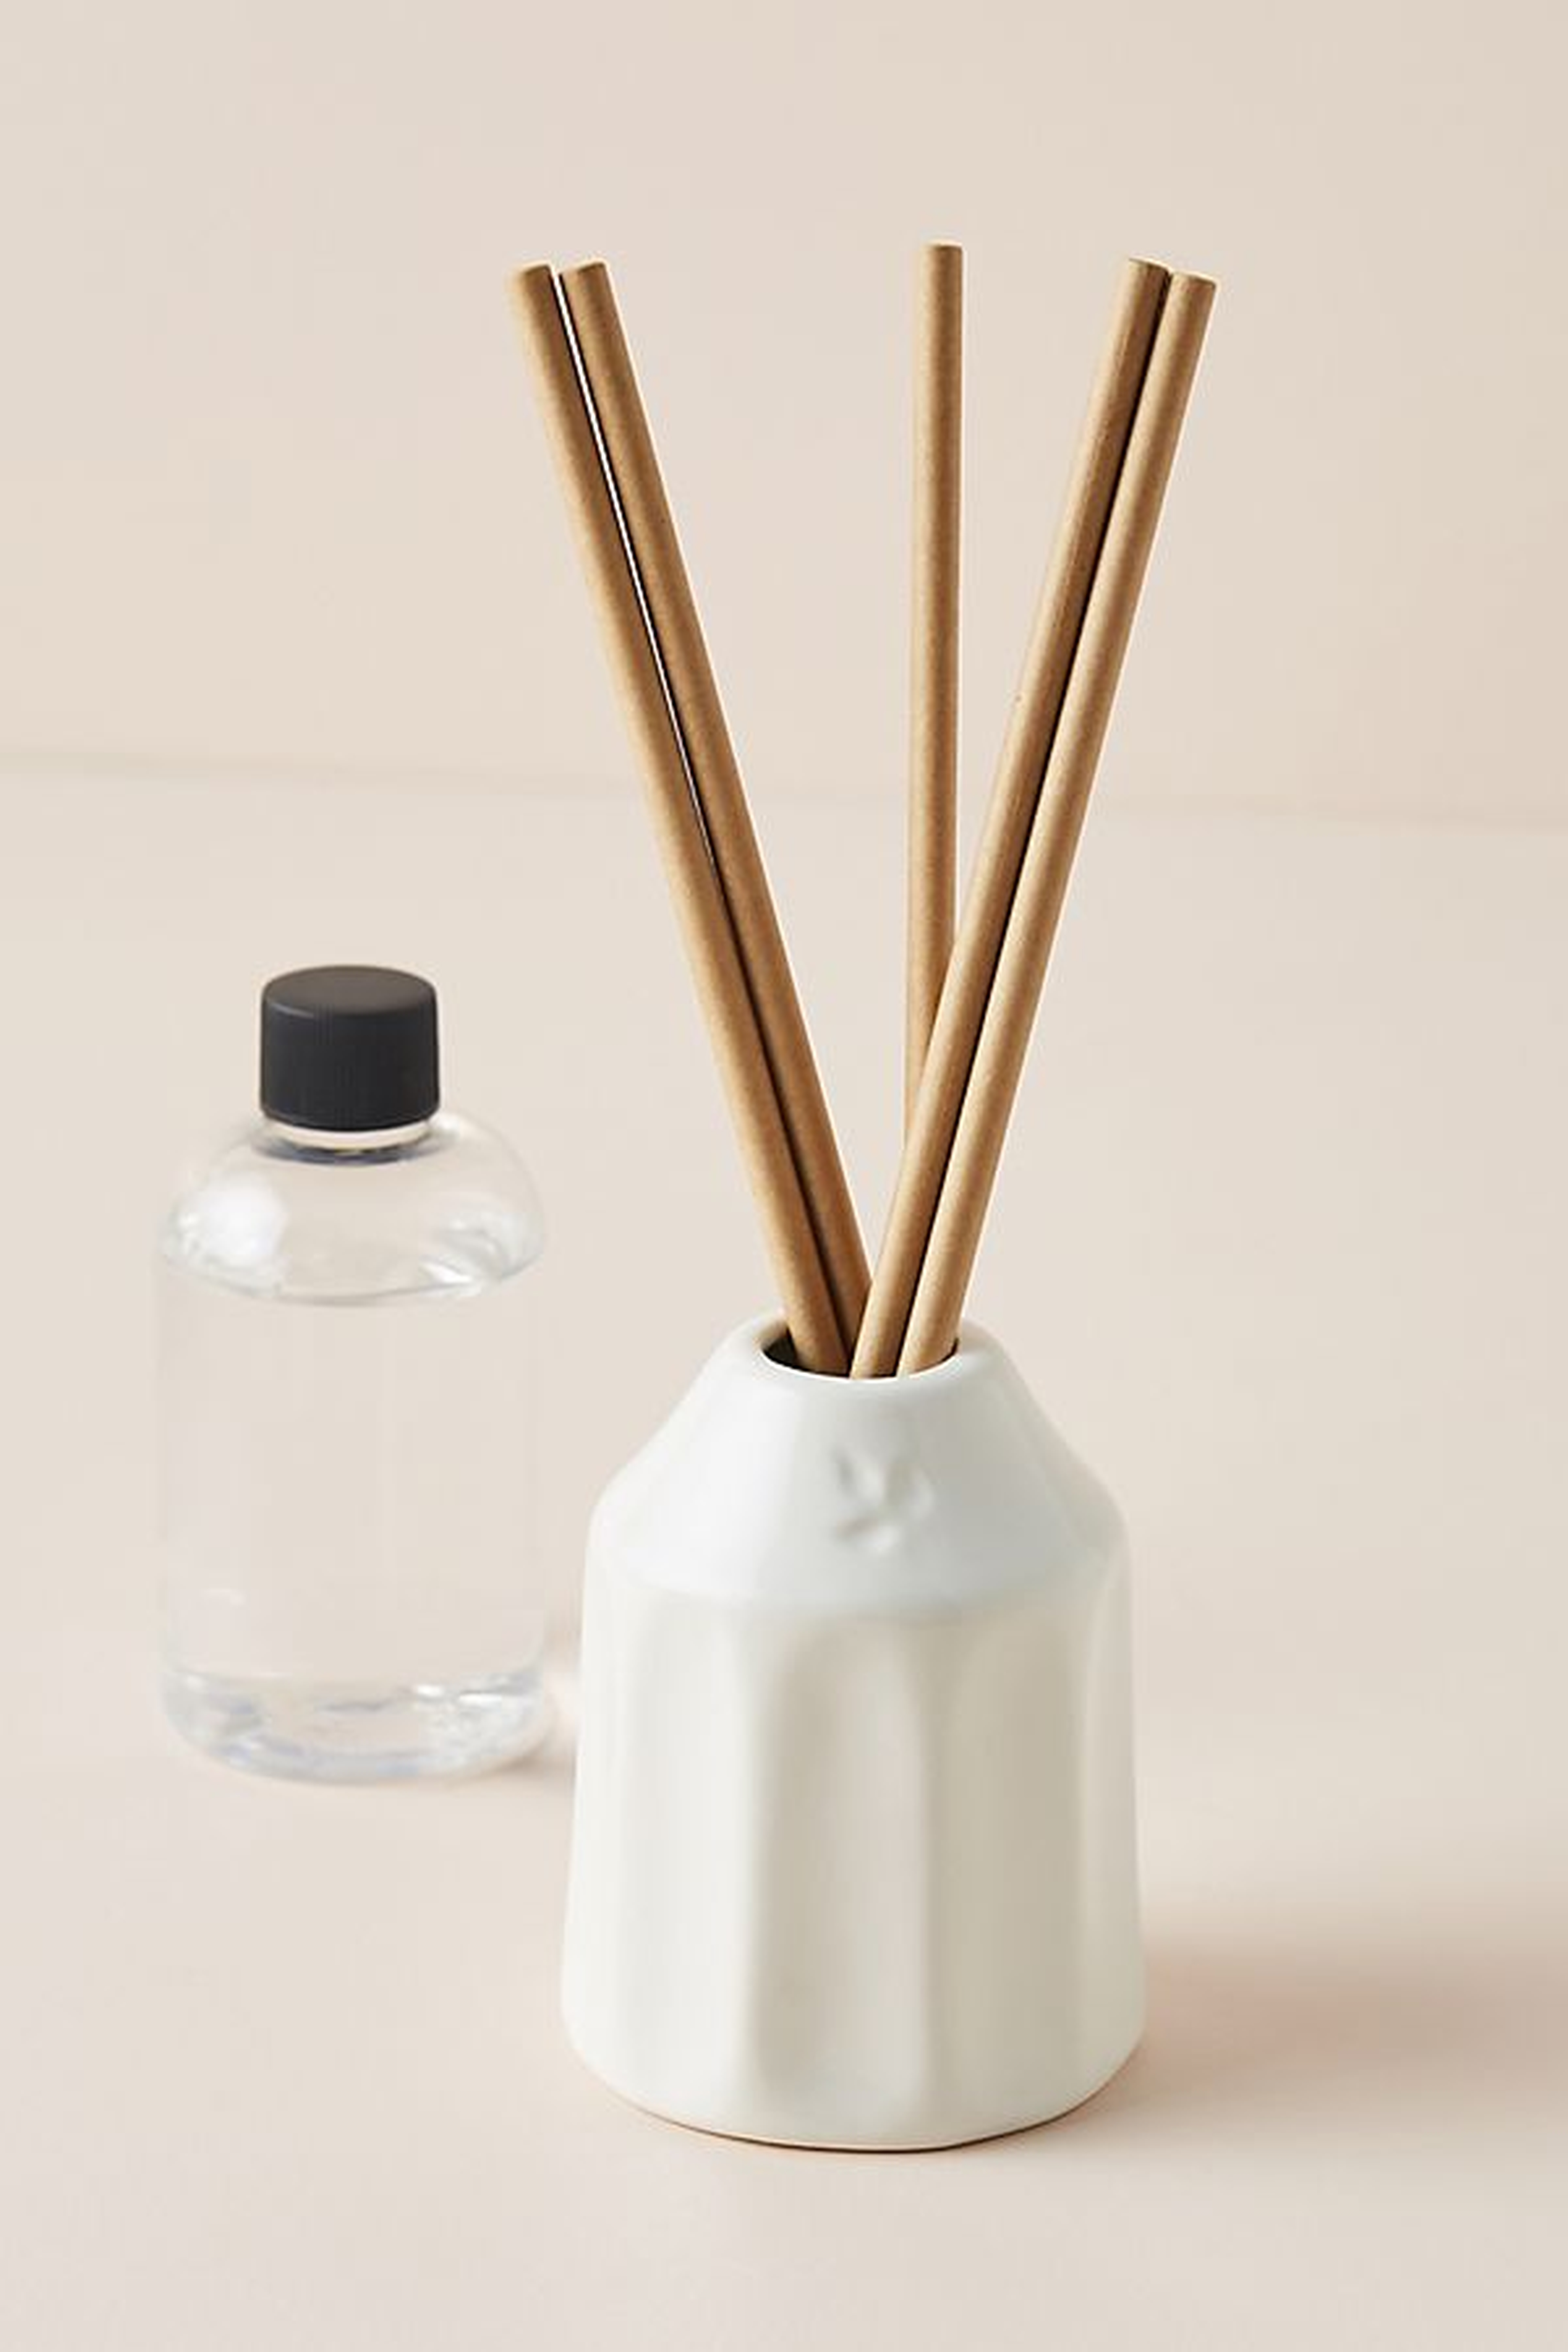 Boulangerie Reed Diffuser - WHIPPED CREAM AND PEAR - Anthropologie